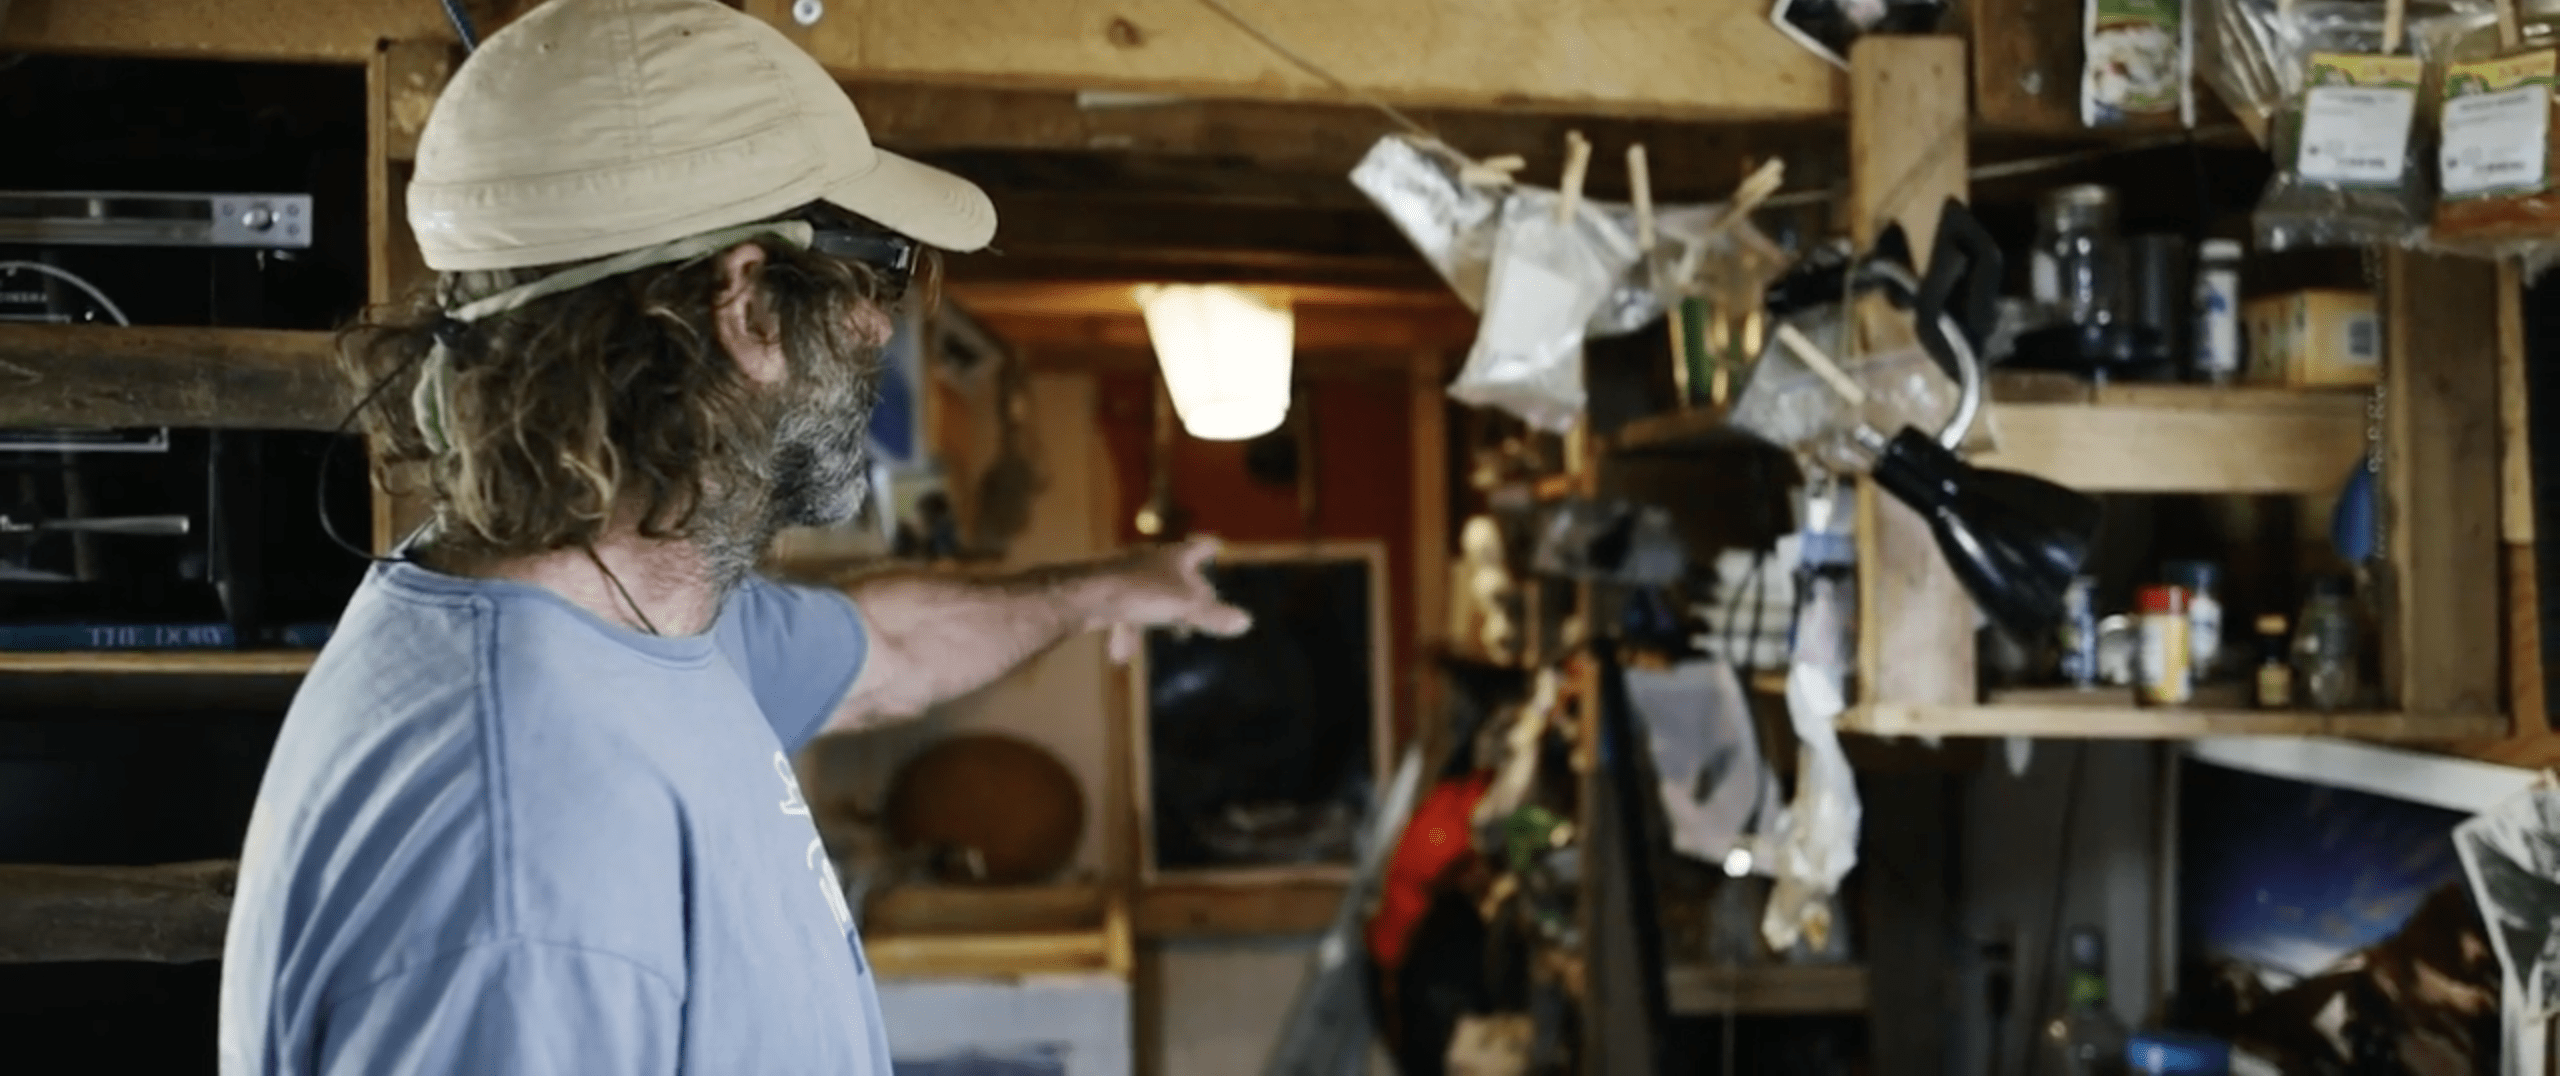 John Shocklee lives in a simple, tiny place. But he haves everything he needs.